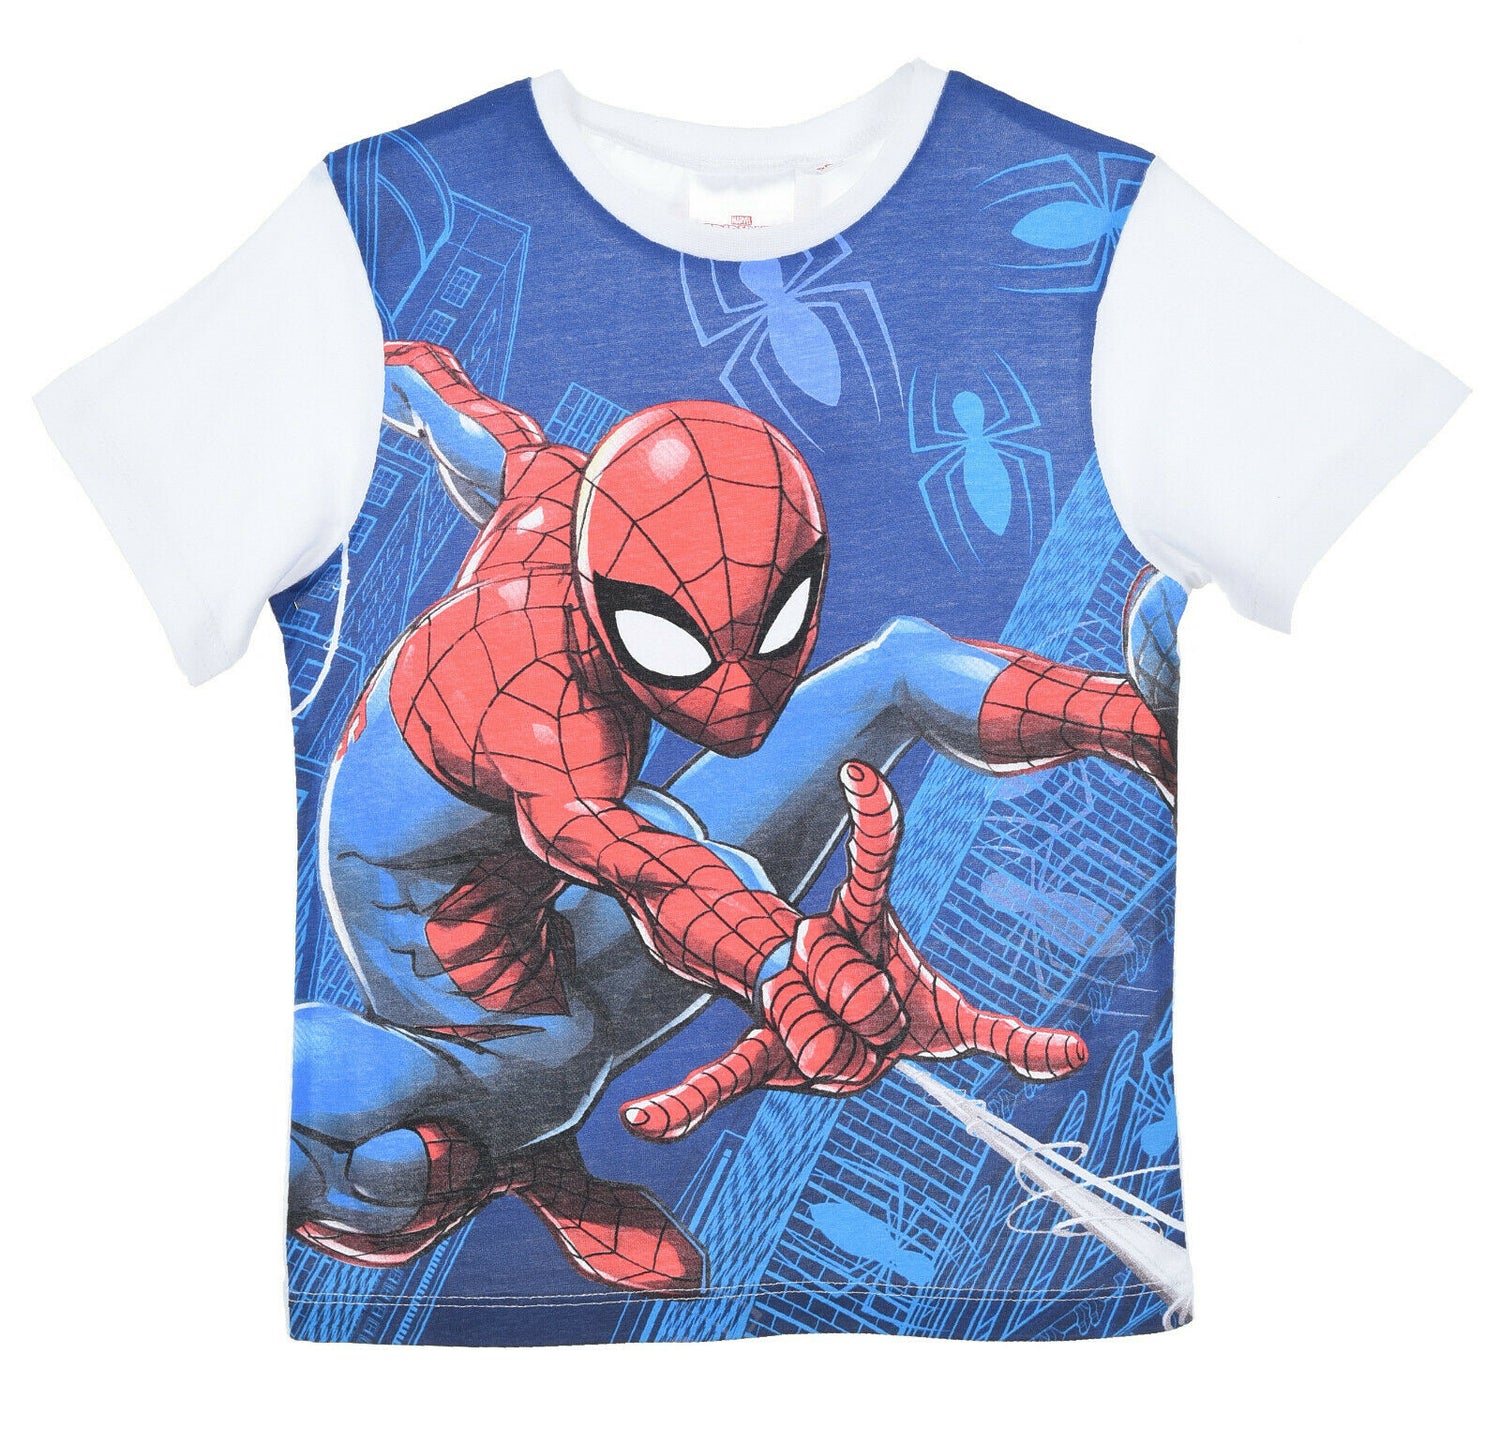 Spiderman  White & Blue Boys Short Sleeve T-Shirt. Ages 3 To 8. These Are Official Merchandise 